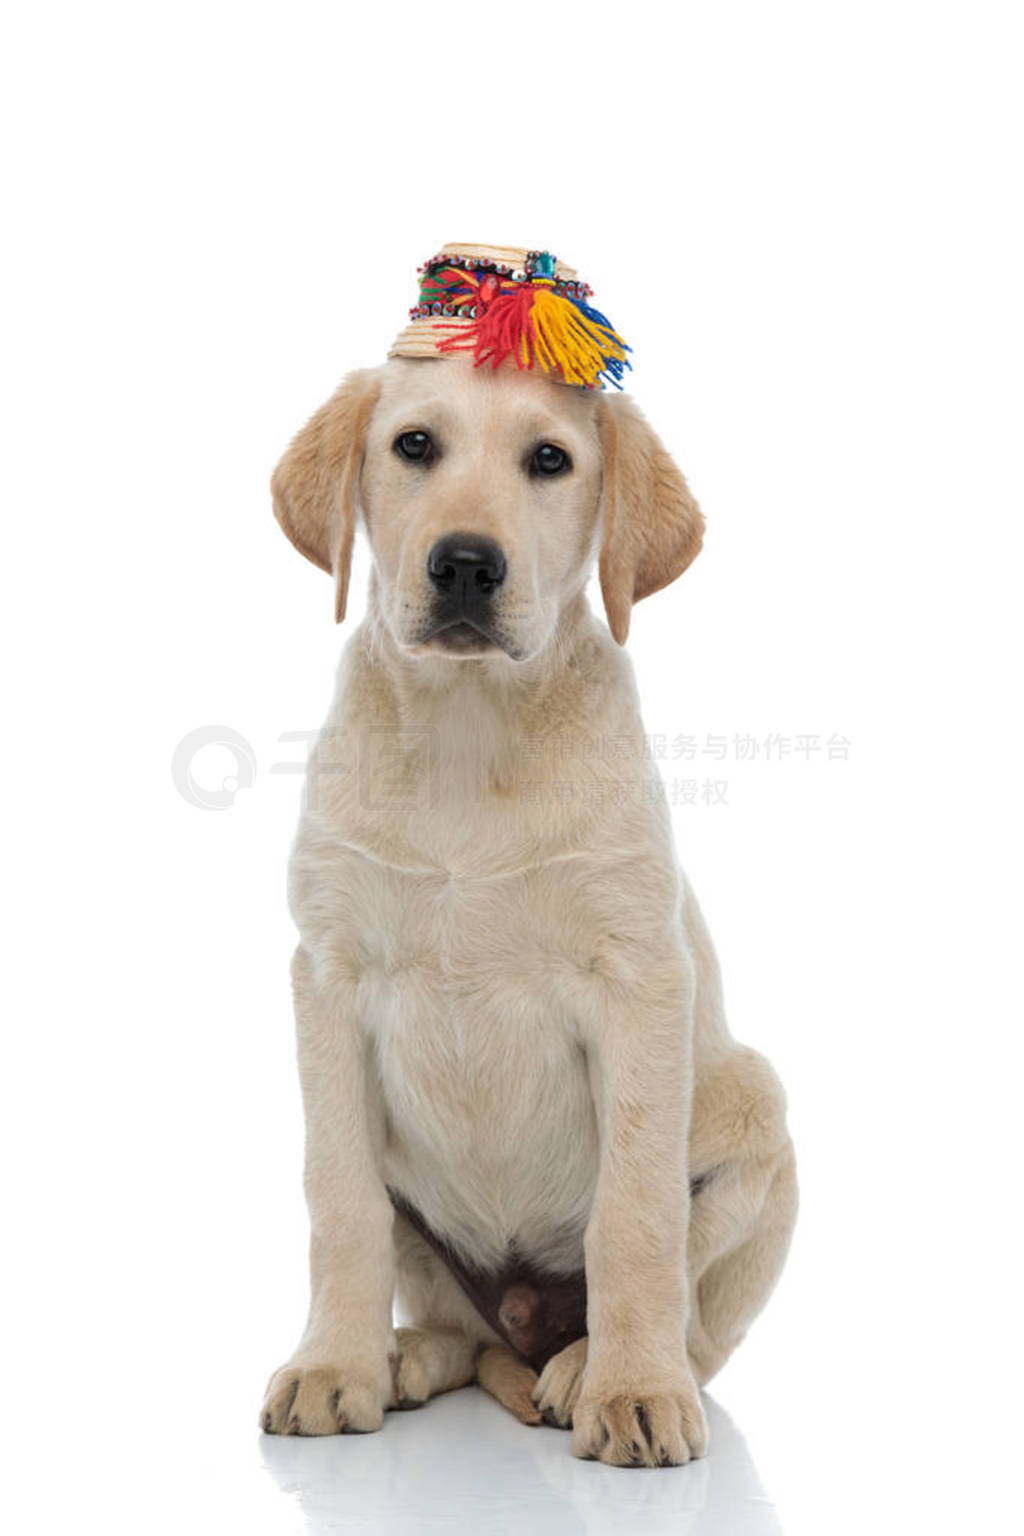 cute labrador retriever wearing traditional straw hat from Oas,